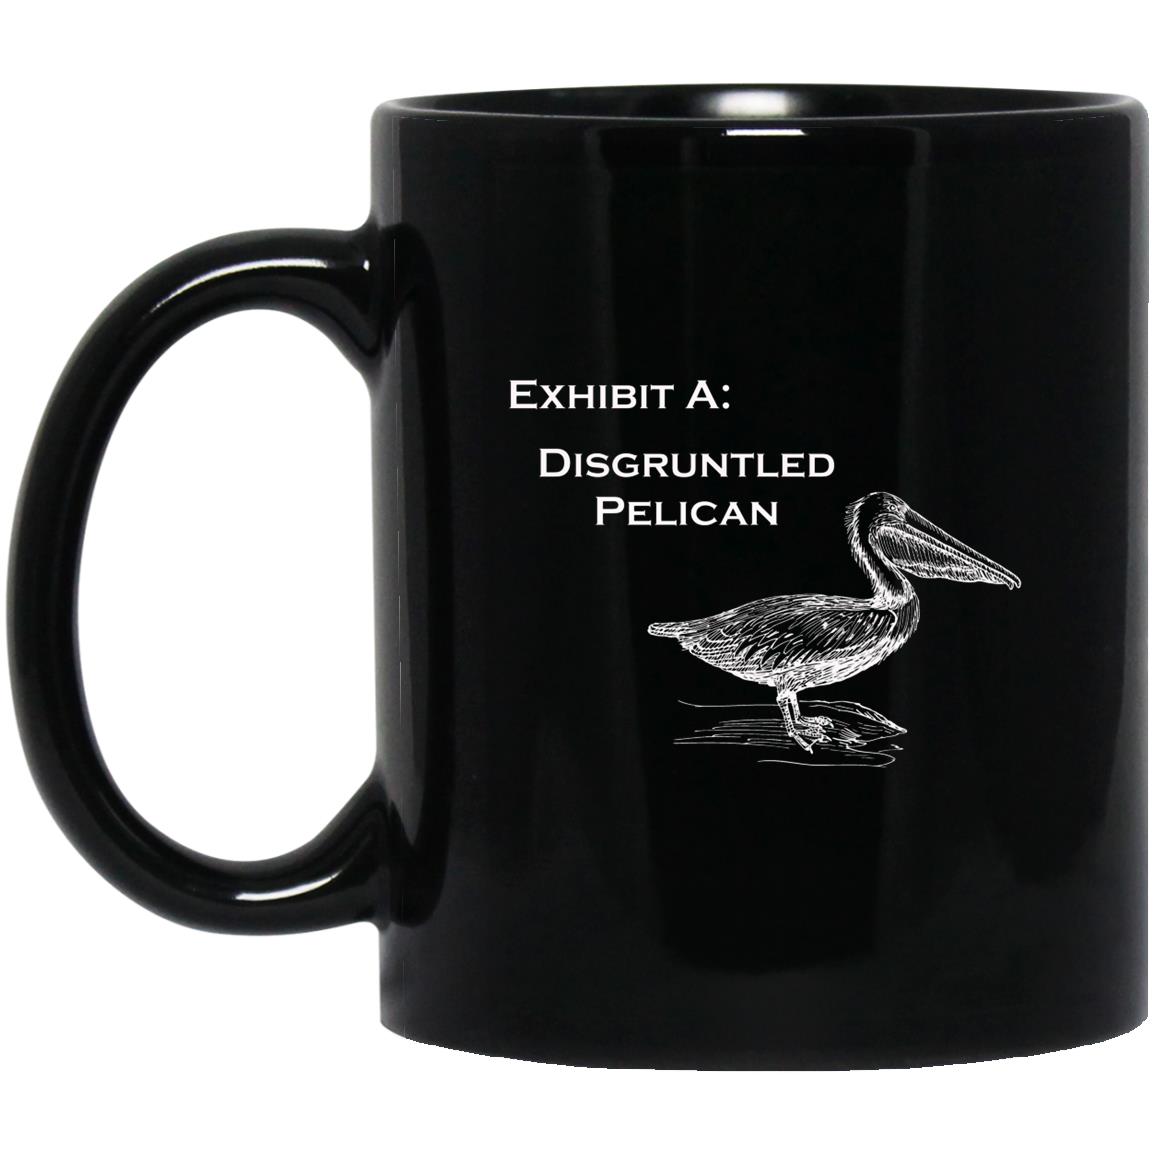 Disgruntled Pelican - Cups Mugs Black, White & Color-Changing